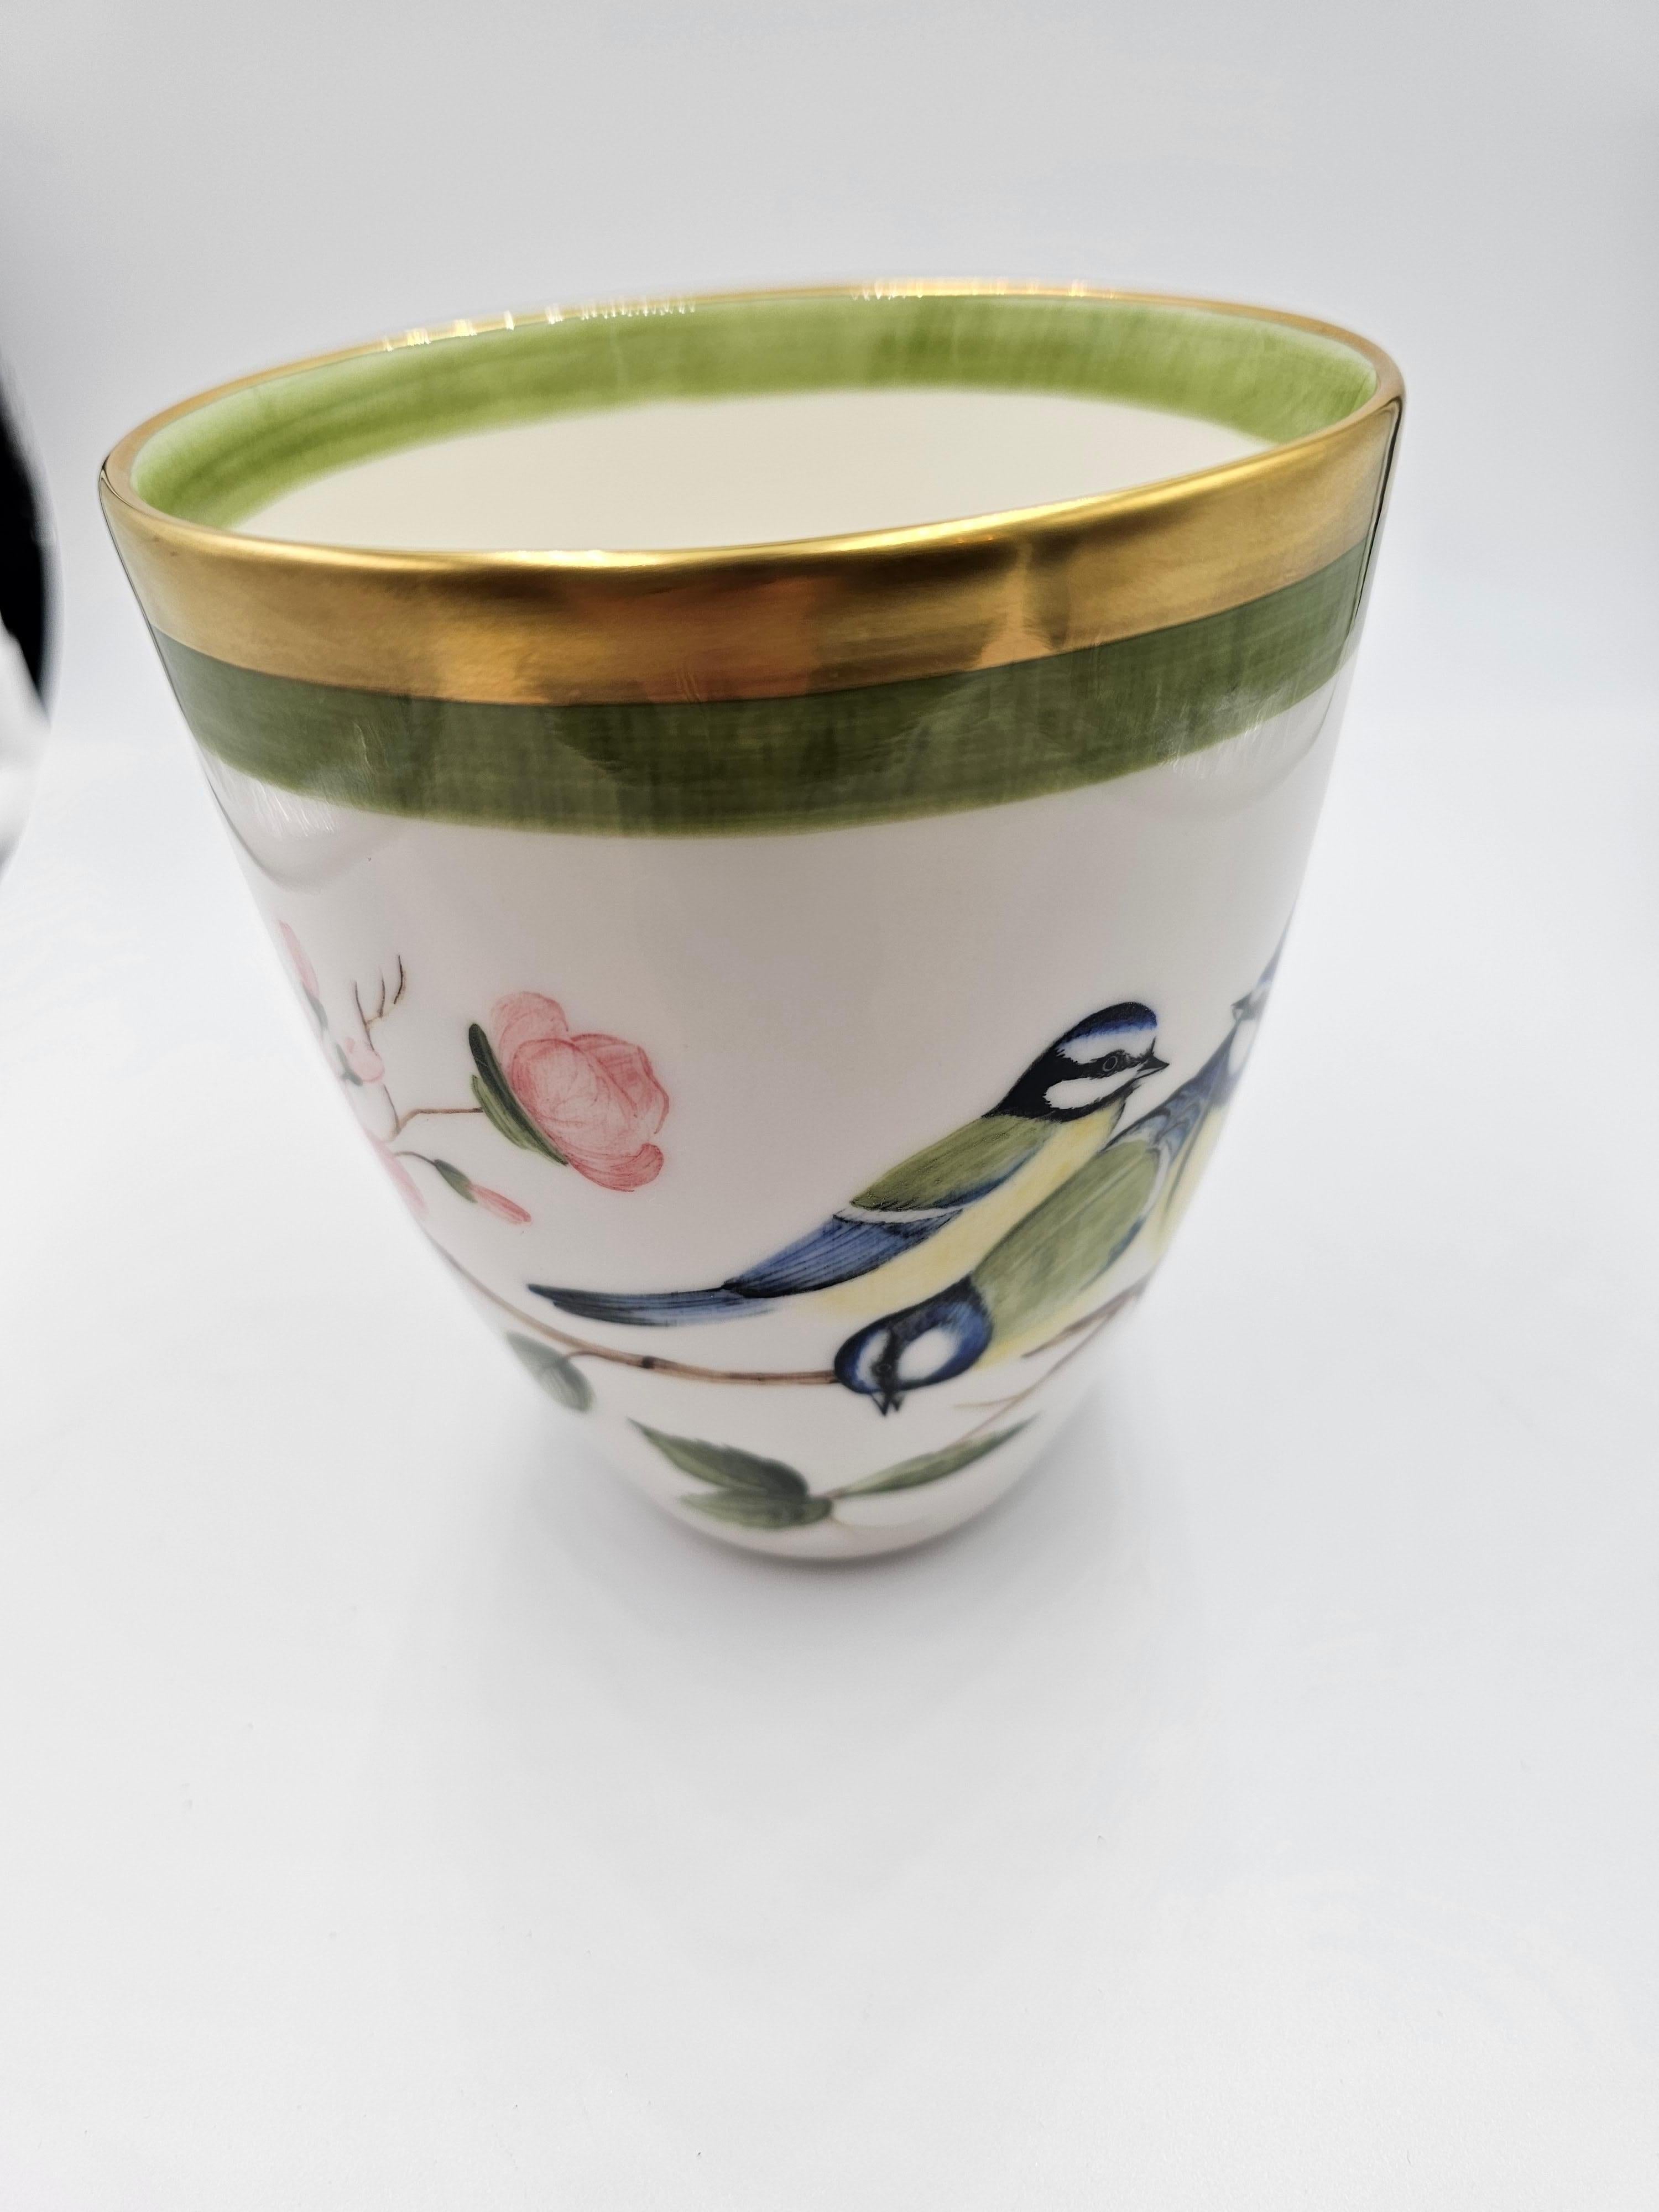 Hands-free painted porcelain vase with a birds and flower decor all around. Rimmed with a 24 carat gold rim. Completely made by hand in Bavaria/Germany with a exclusive decor for Sofina Boutique Kitzbühel.
Looks beautiful with fresh flowers or with